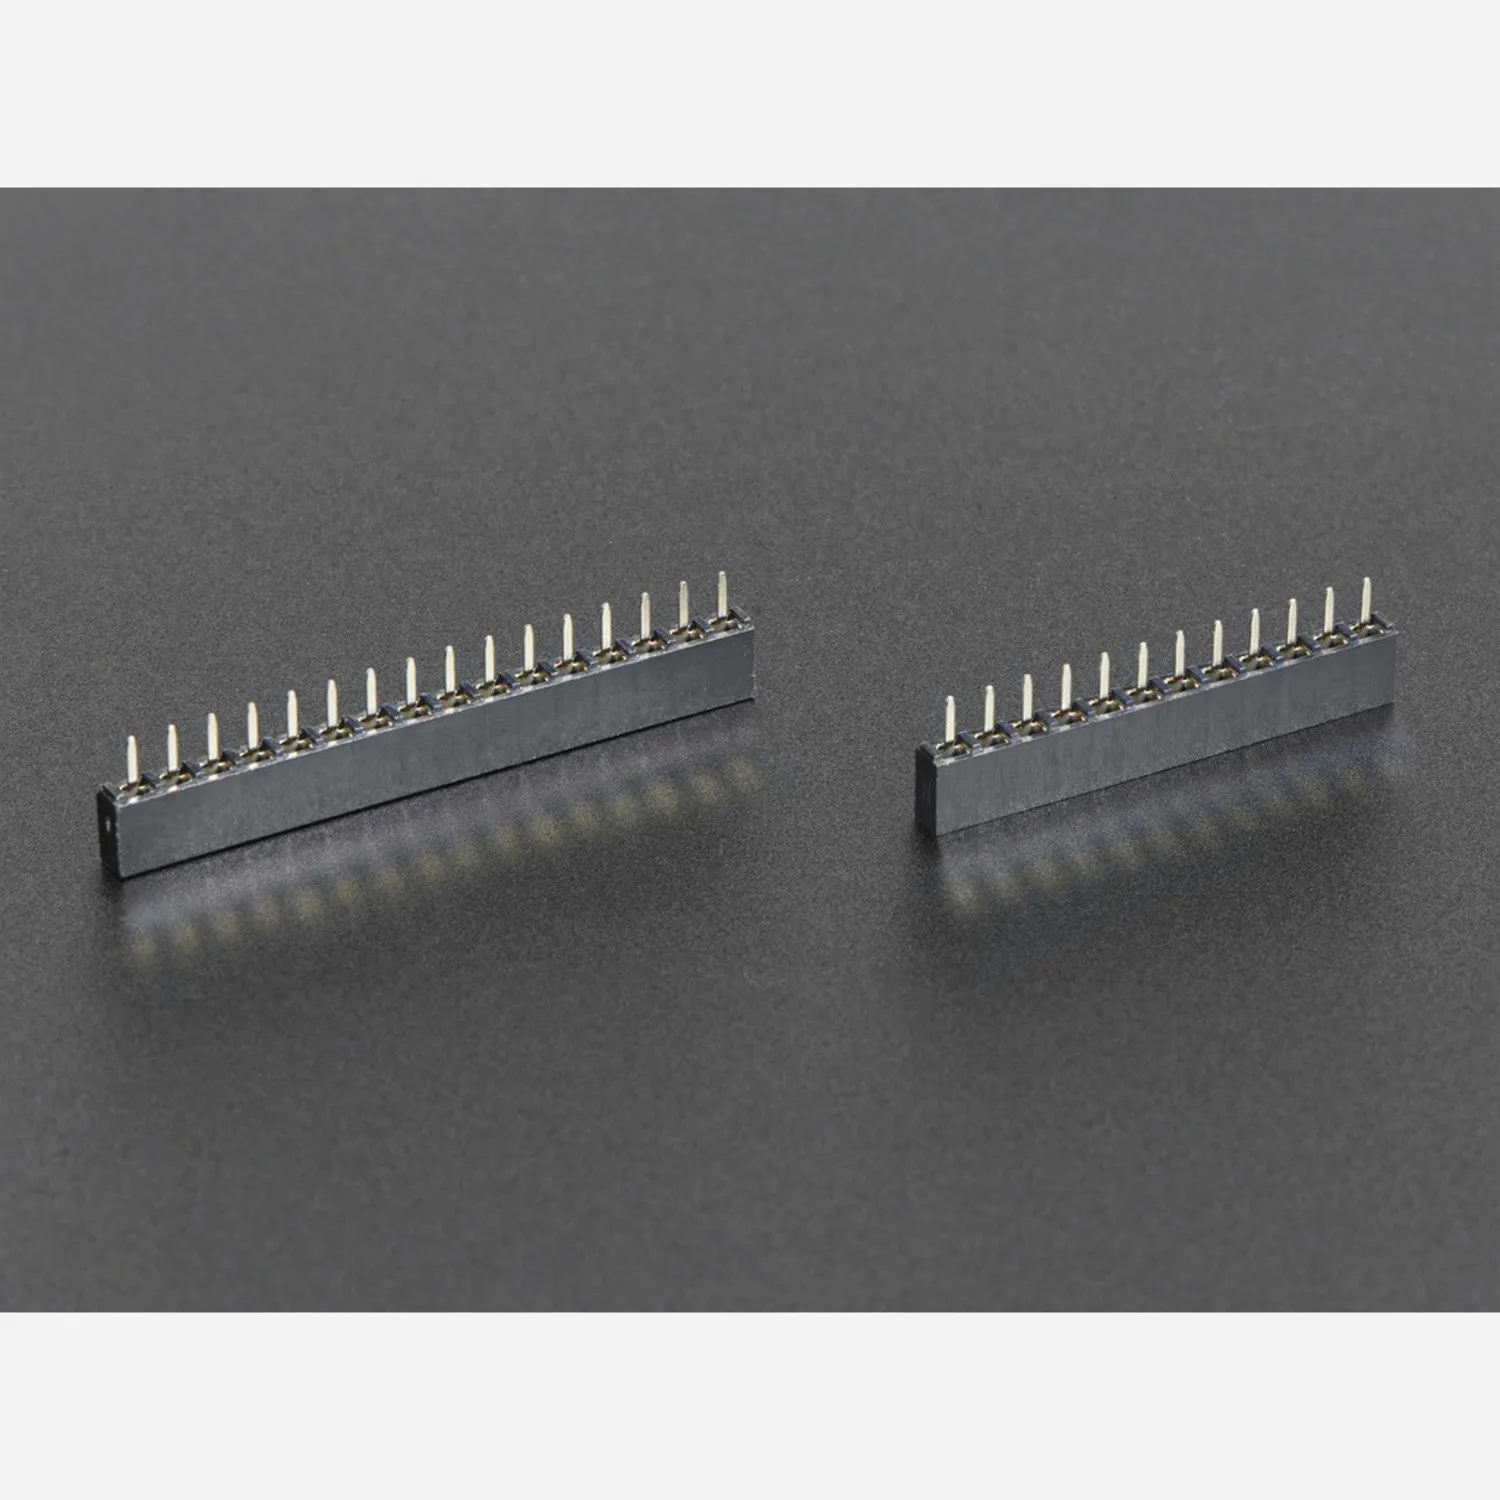 Photo of Short Feather Headers Kit - 12-pin and 16-pin Female Header Set